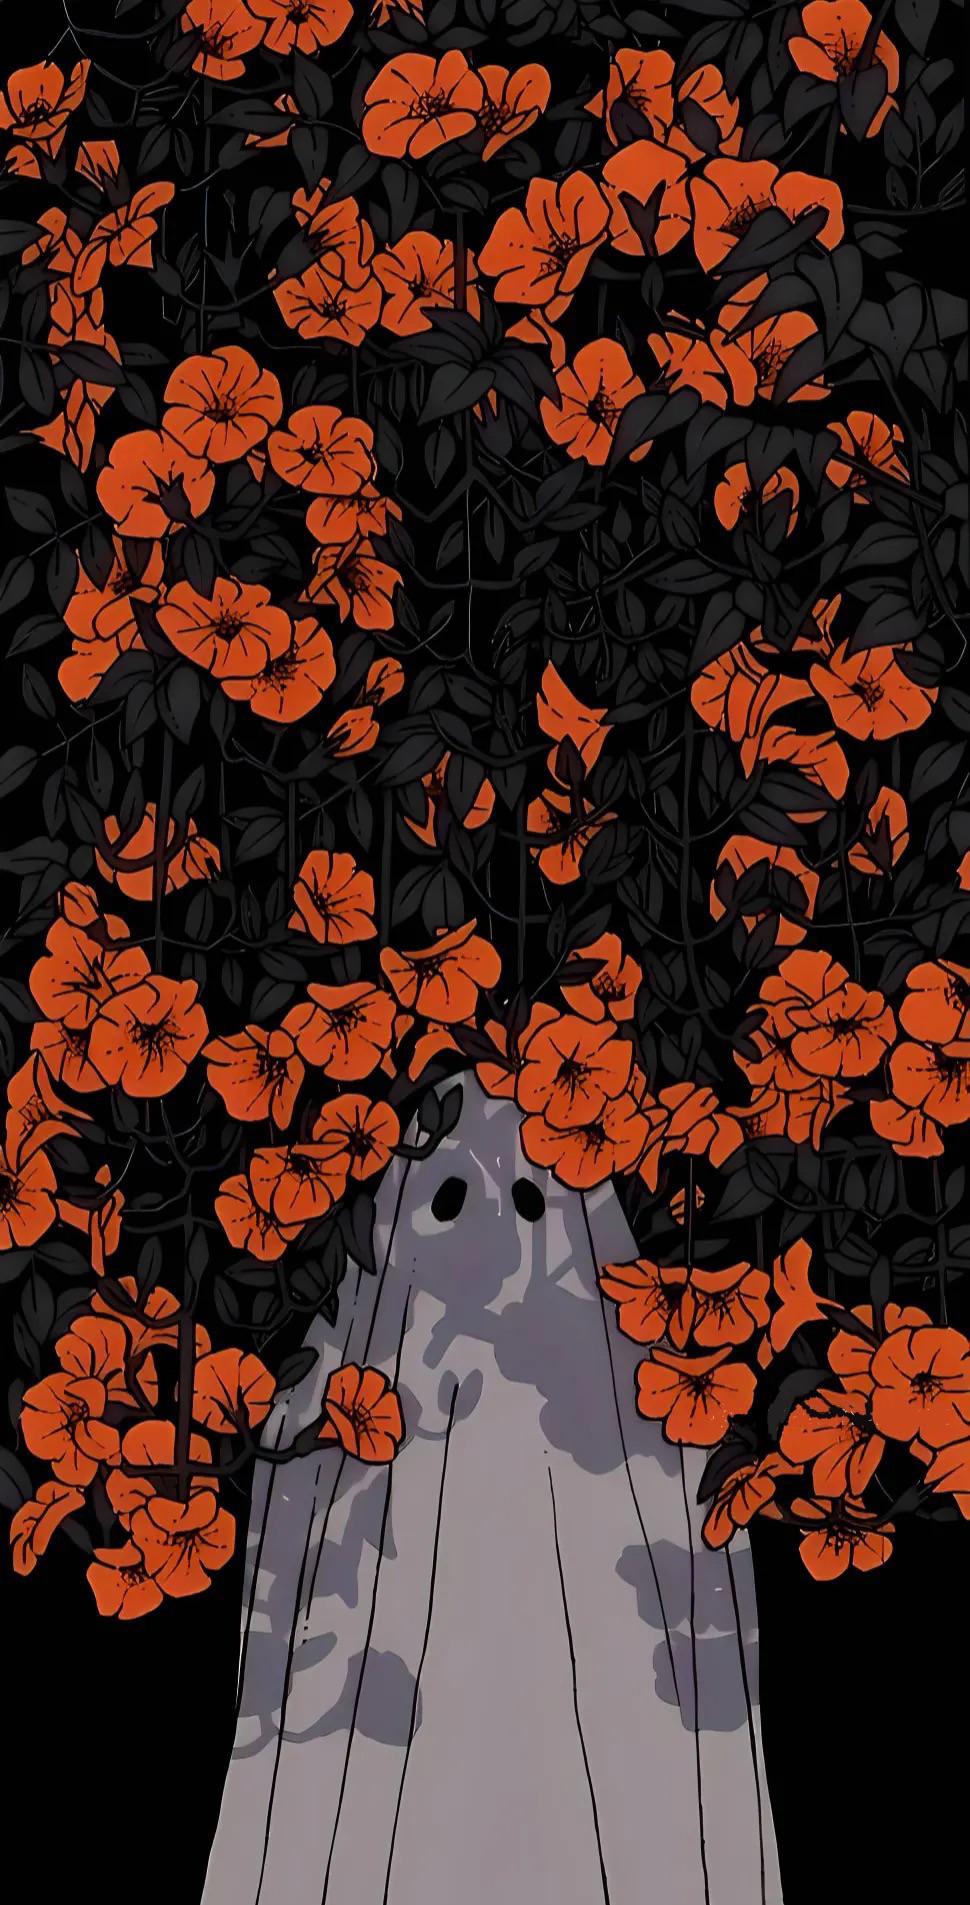 Looking For A Home Screen Wallpaper To Match The Color Scheme, And Halloween Fall Aesthetic